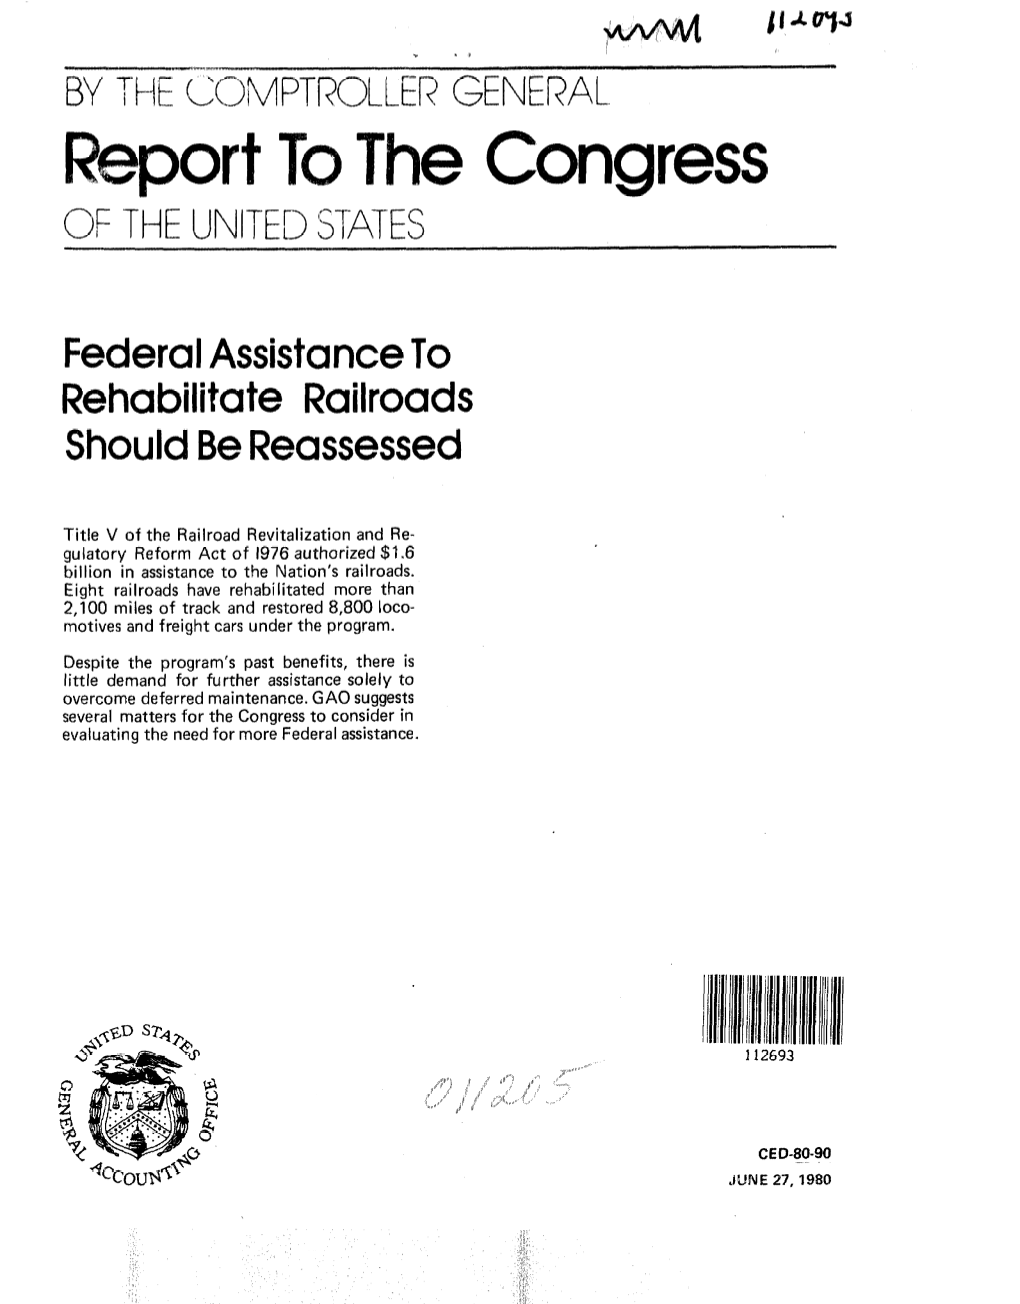 CED-80-90 Federal Assistance to Rehabilitate Railroads Should Be